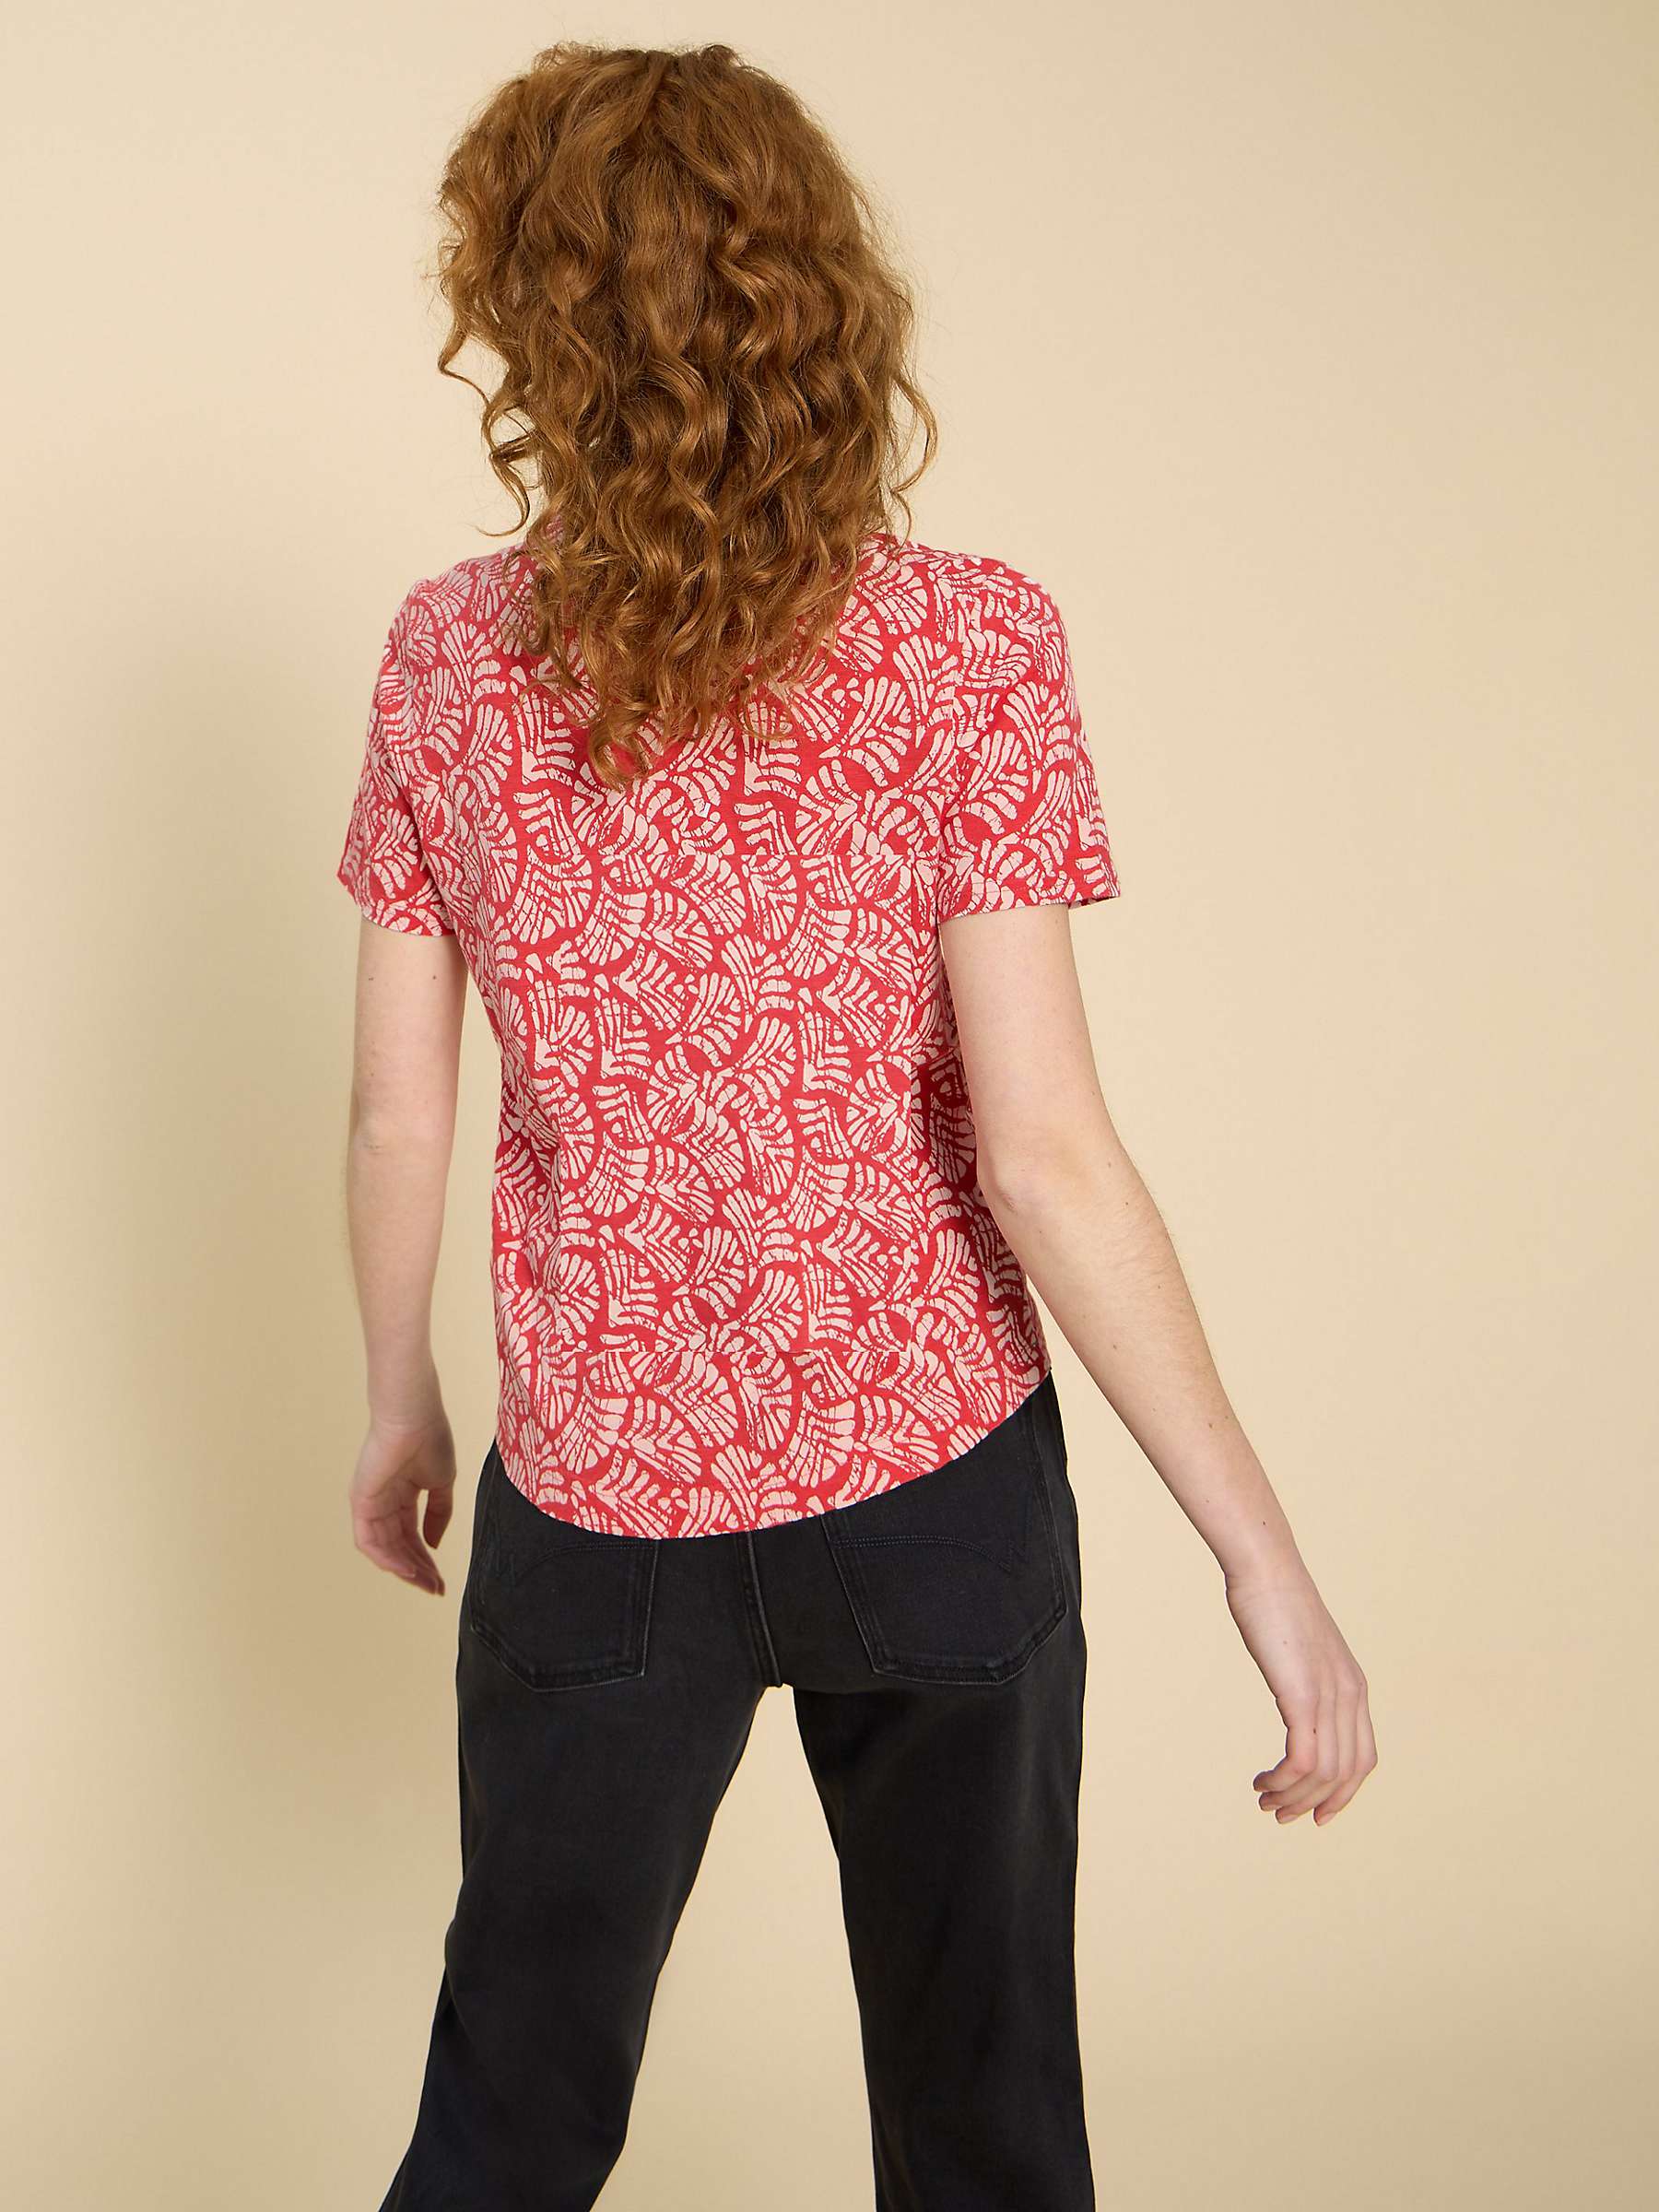 Buy White Stuff Penny Pocket Jersey Shirt, Red Online at johnlewis.com